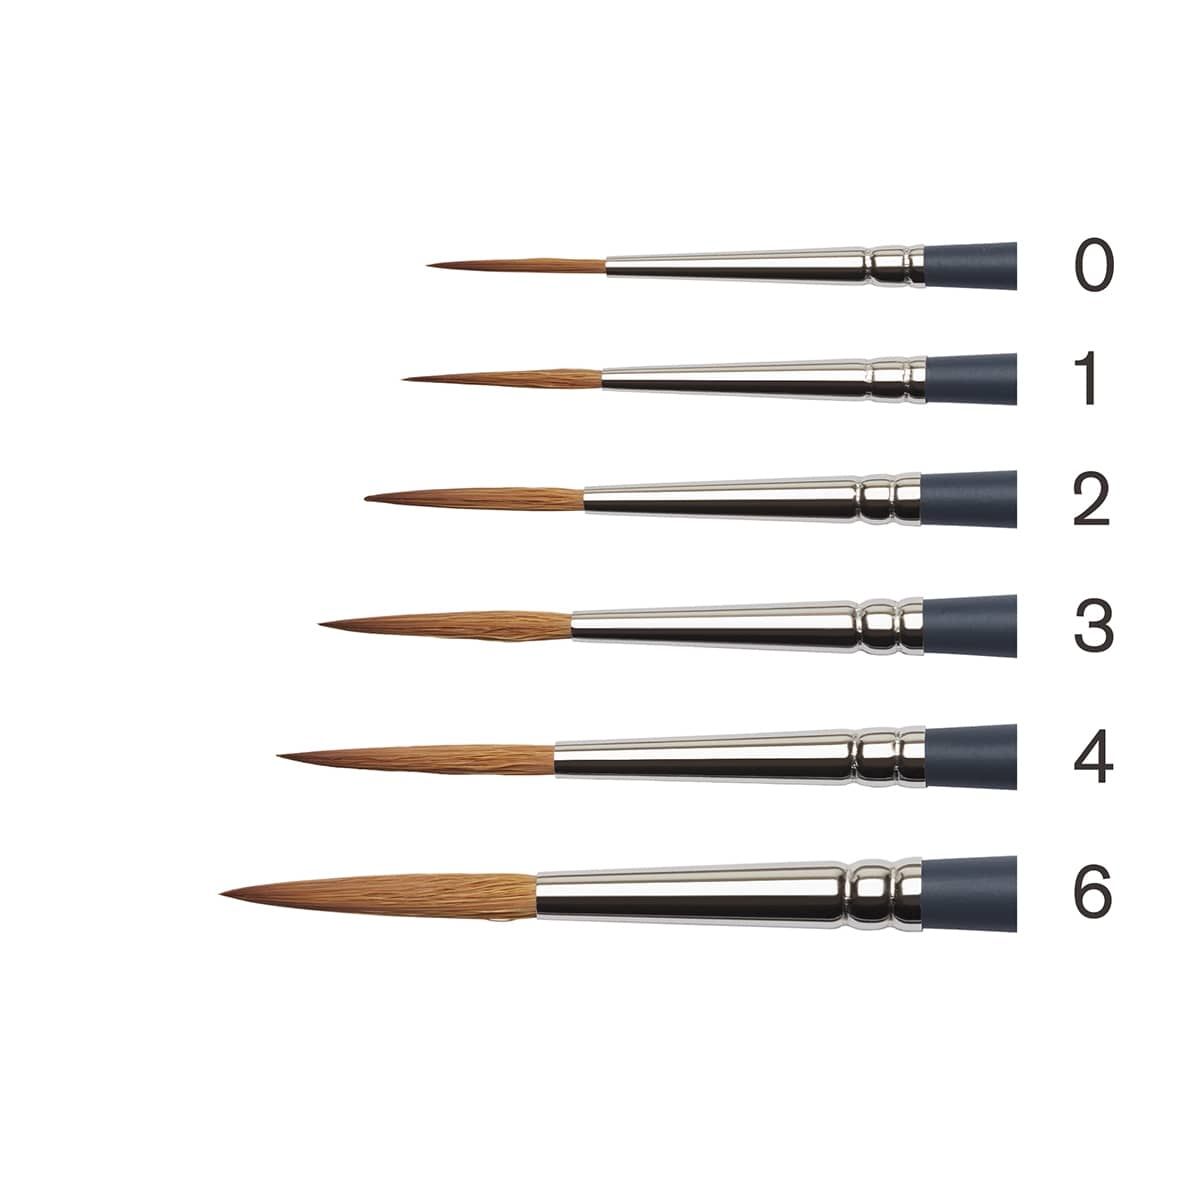 Rigger group: Winsor & Newton Professional Watercolor Synthetic Brushes